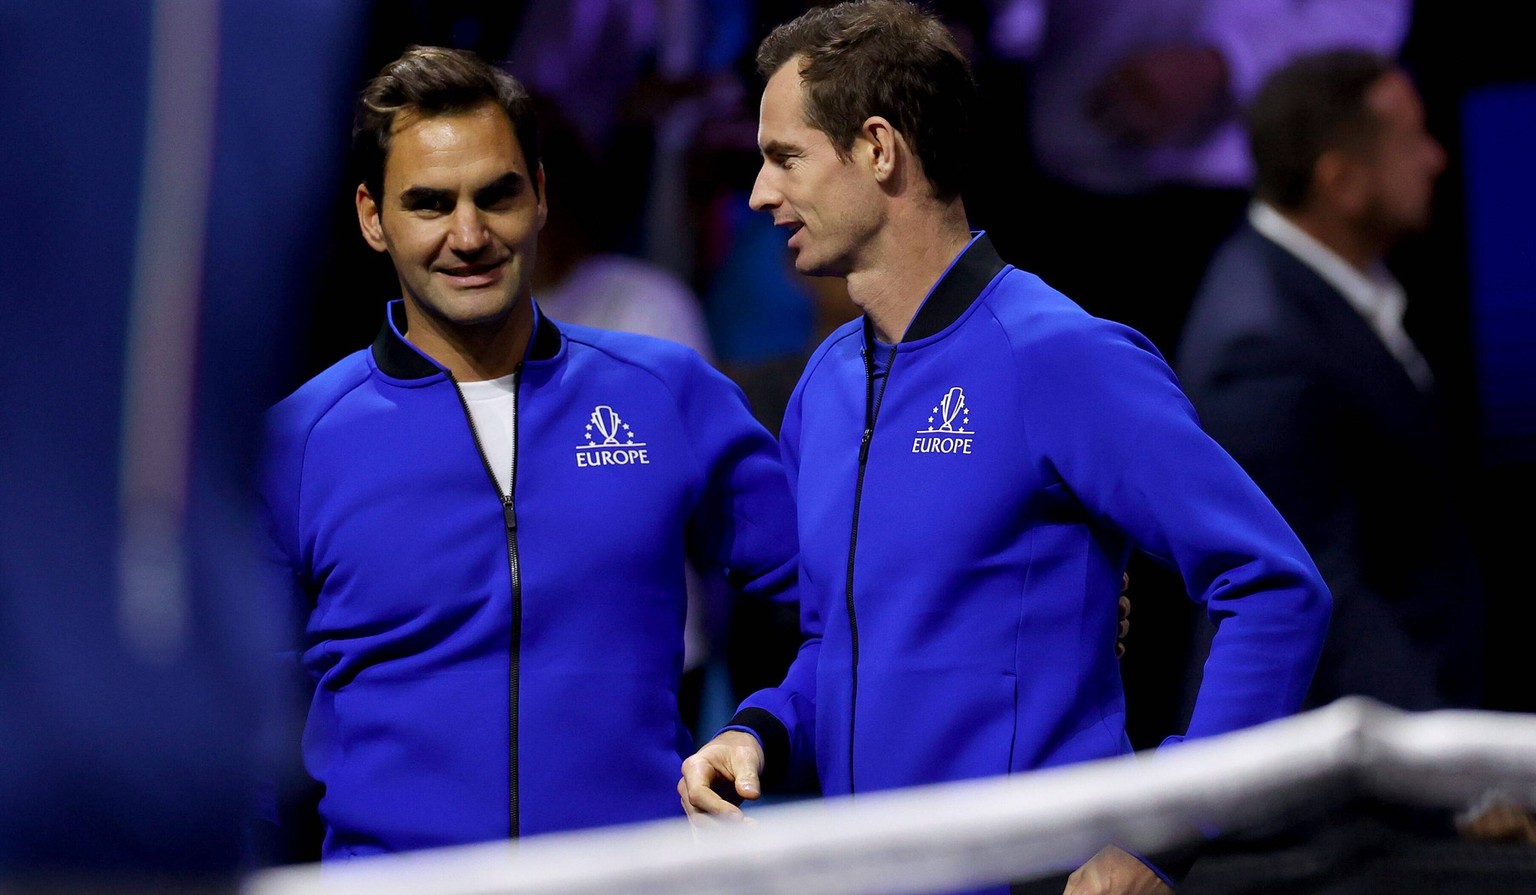 Mandatory Credit: Photo by Ella Ling/Shutterstock 13414643c Roger Federer and Andy Murray of Team Europe chat Laver Cup, Tennis Tournament, Day Two, 02 Arena, London, UK - 24 Sep 2022 Laver Cup, Tenni ...